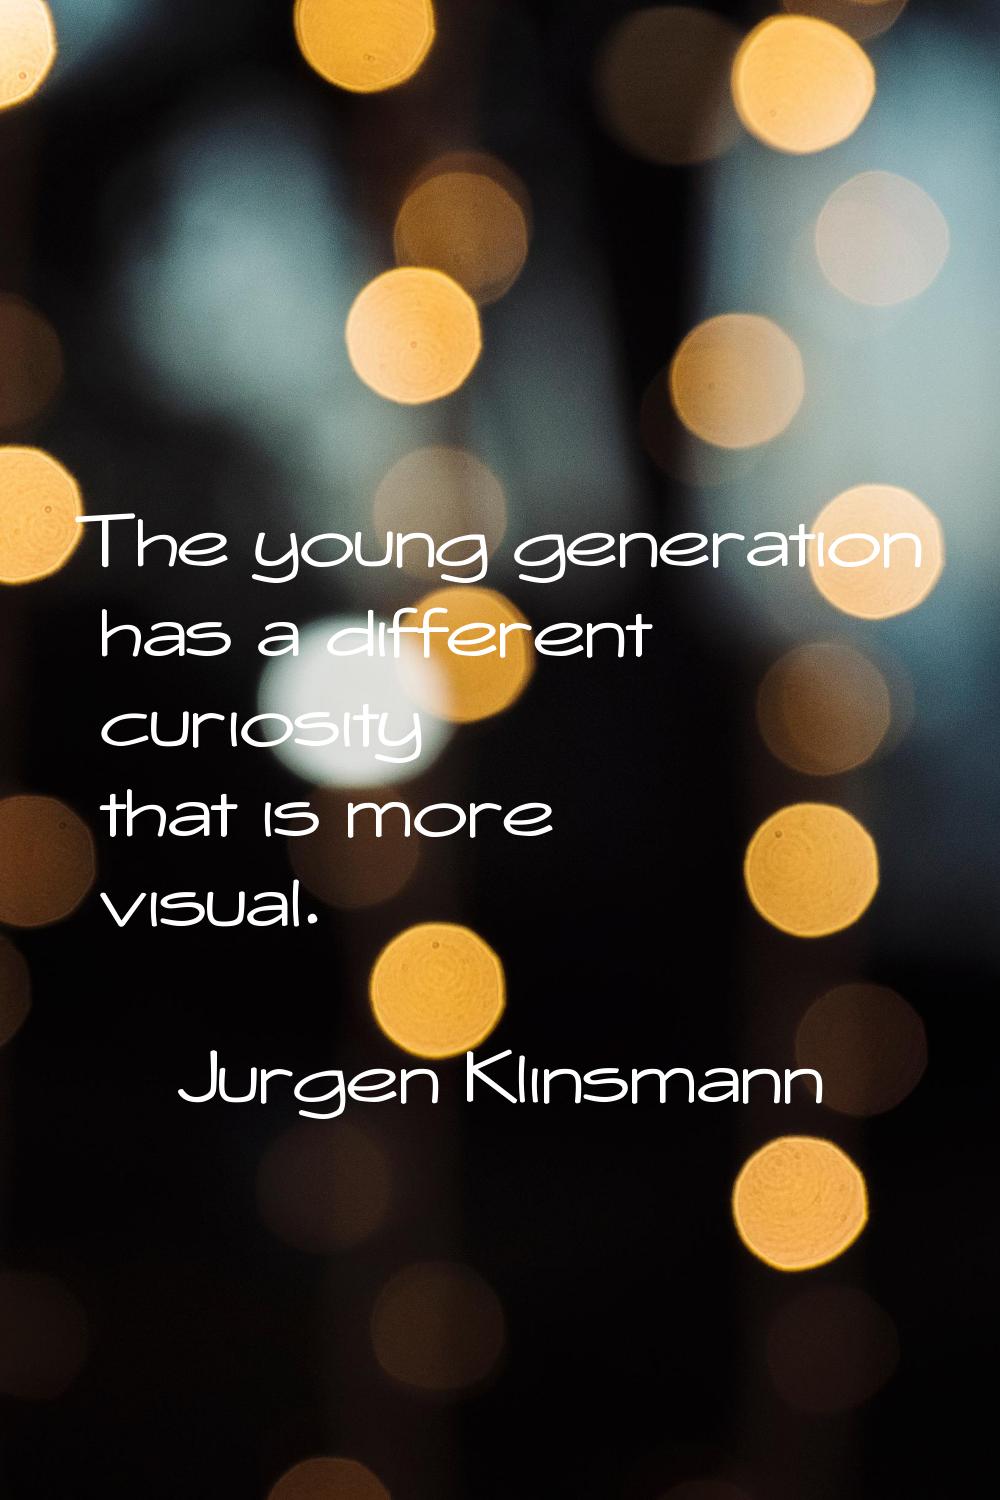 The young generation has a different curiosity that is more visual.